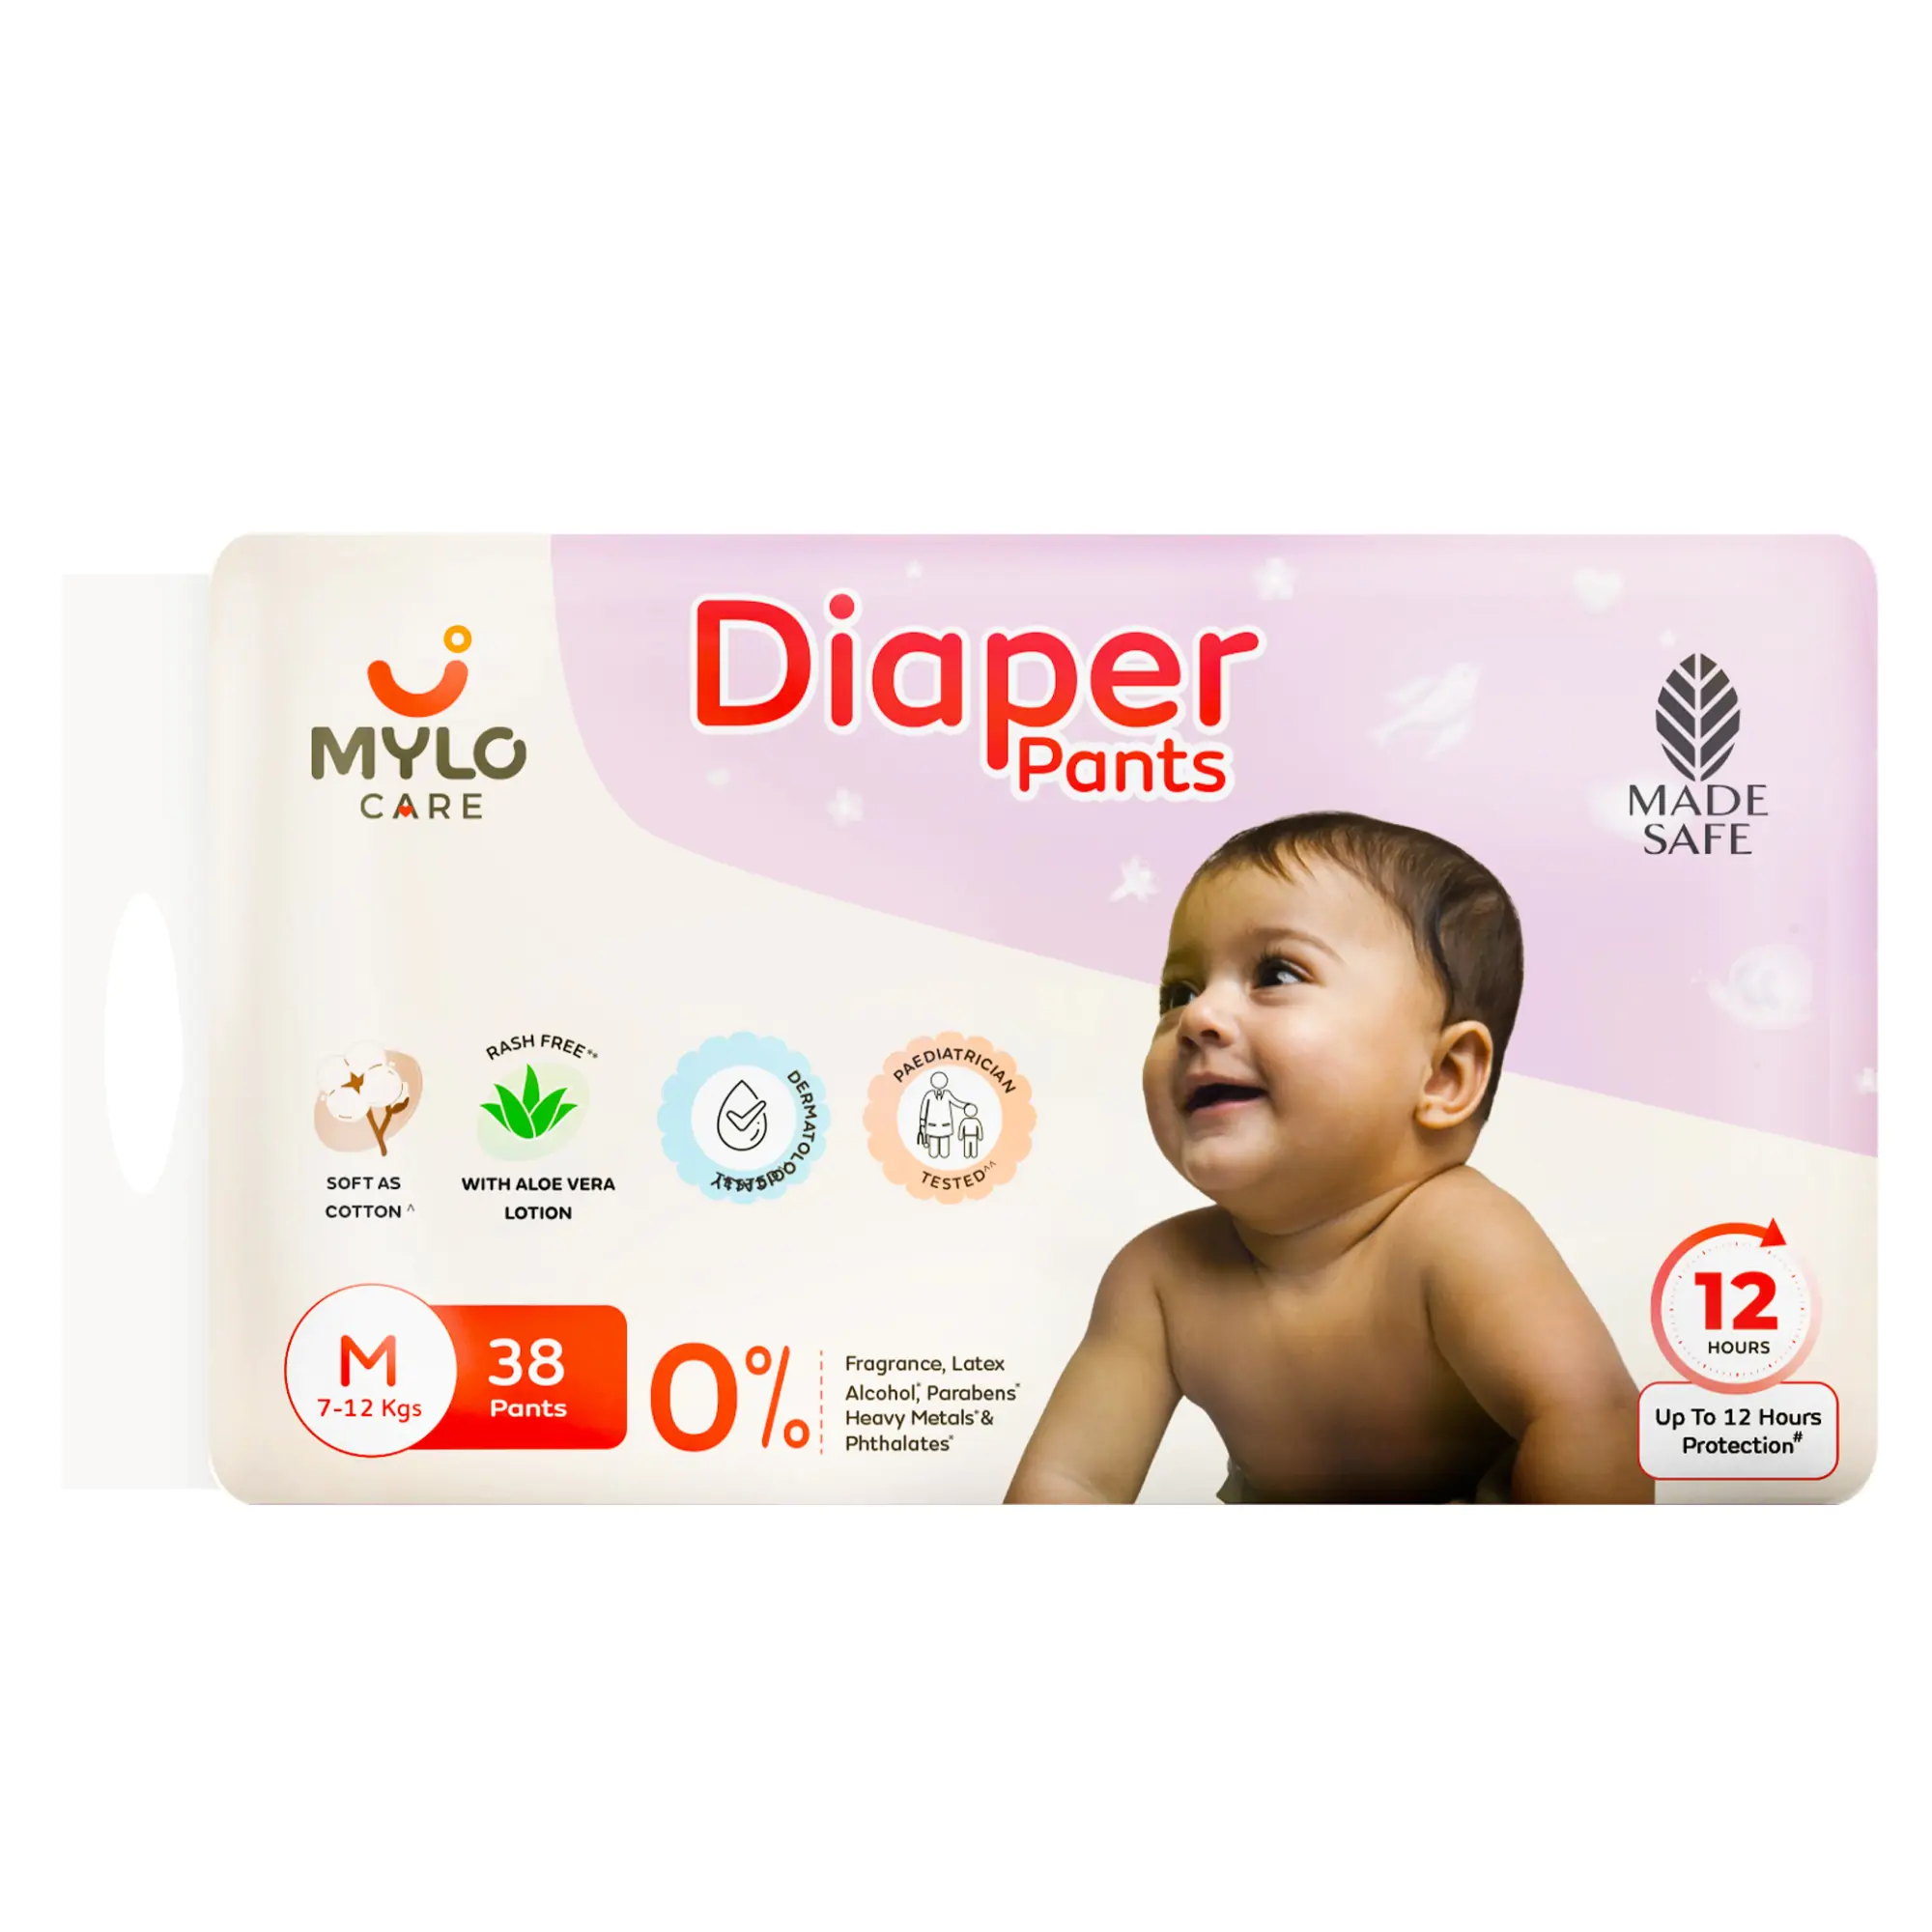 Mylo Care Baby Diaper Pants Medium (M) Size, 7-12 kgs with ADL Technology - 38 Count - 12 Hours Protection 